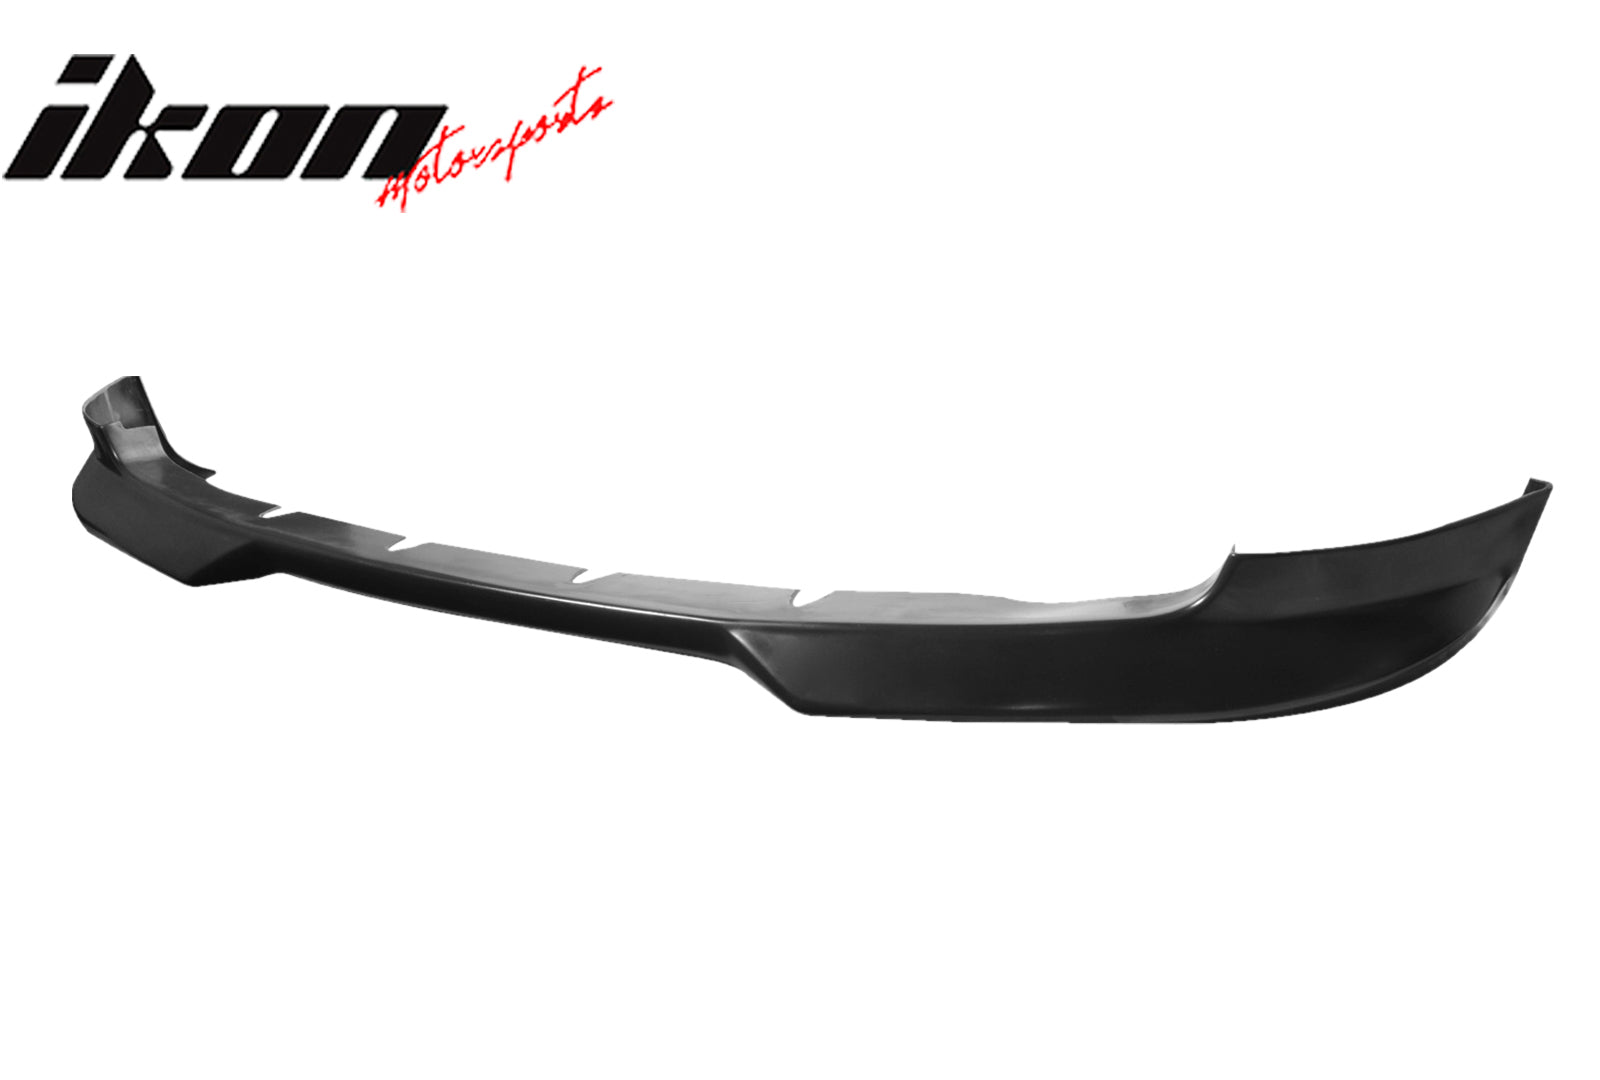 Fits 99-03 BMW E46 3 Series 2Dr Coupe H Style Front Bumper Lip Spoiler PU